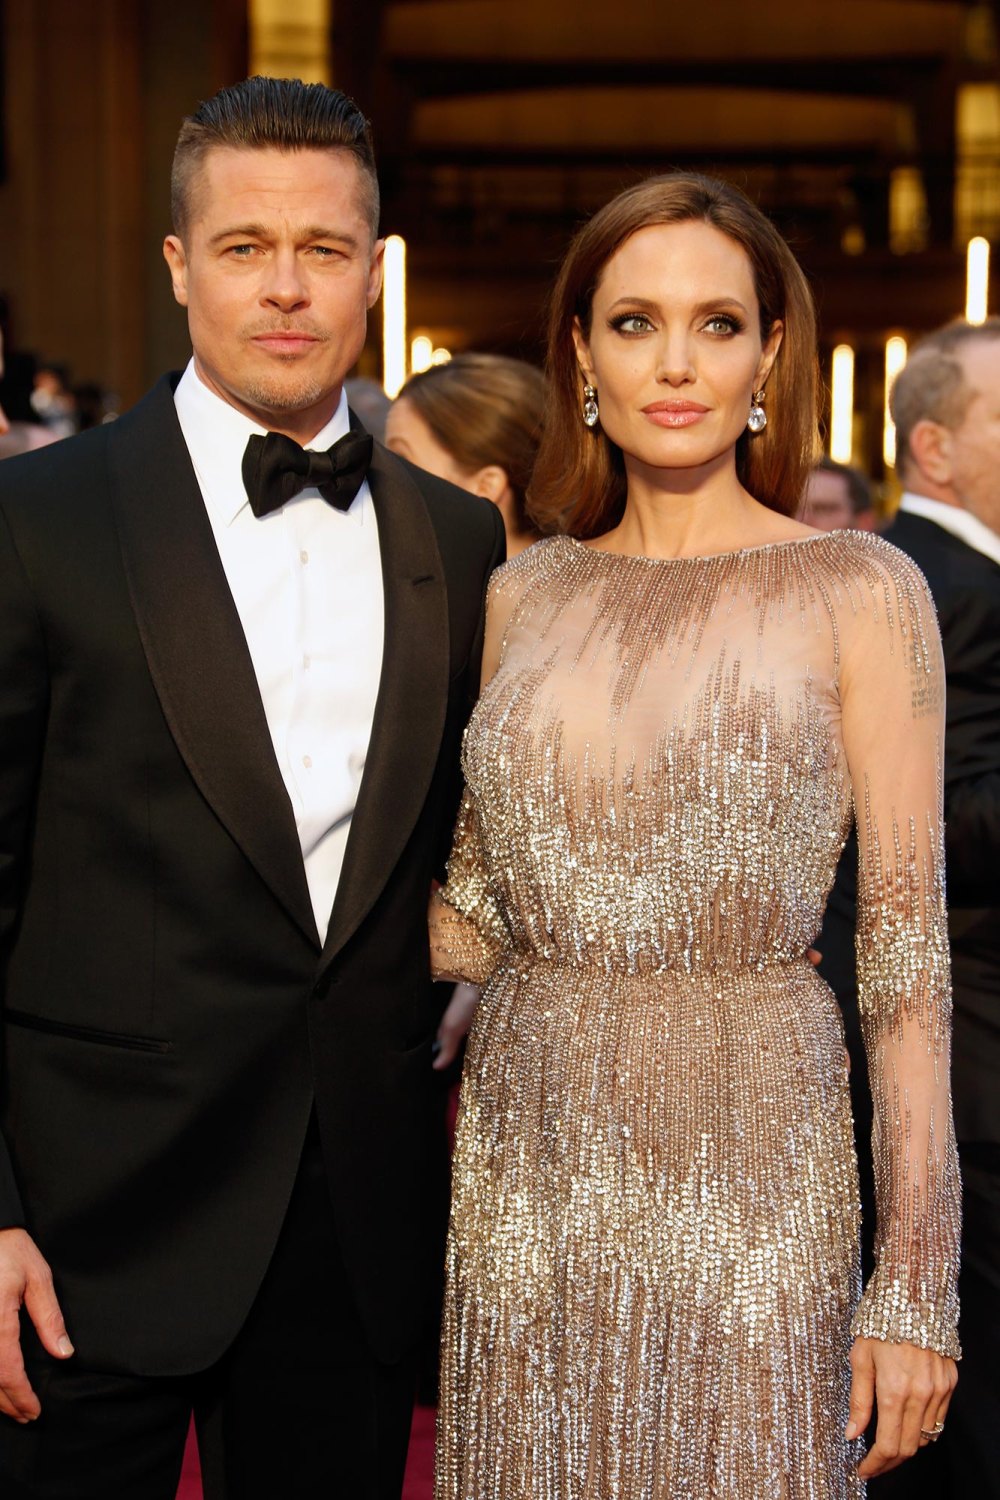 Angelina Jolie Says Shes In Transition After Brad Pitt Divorce Dont Feel Like Ive Been Myself